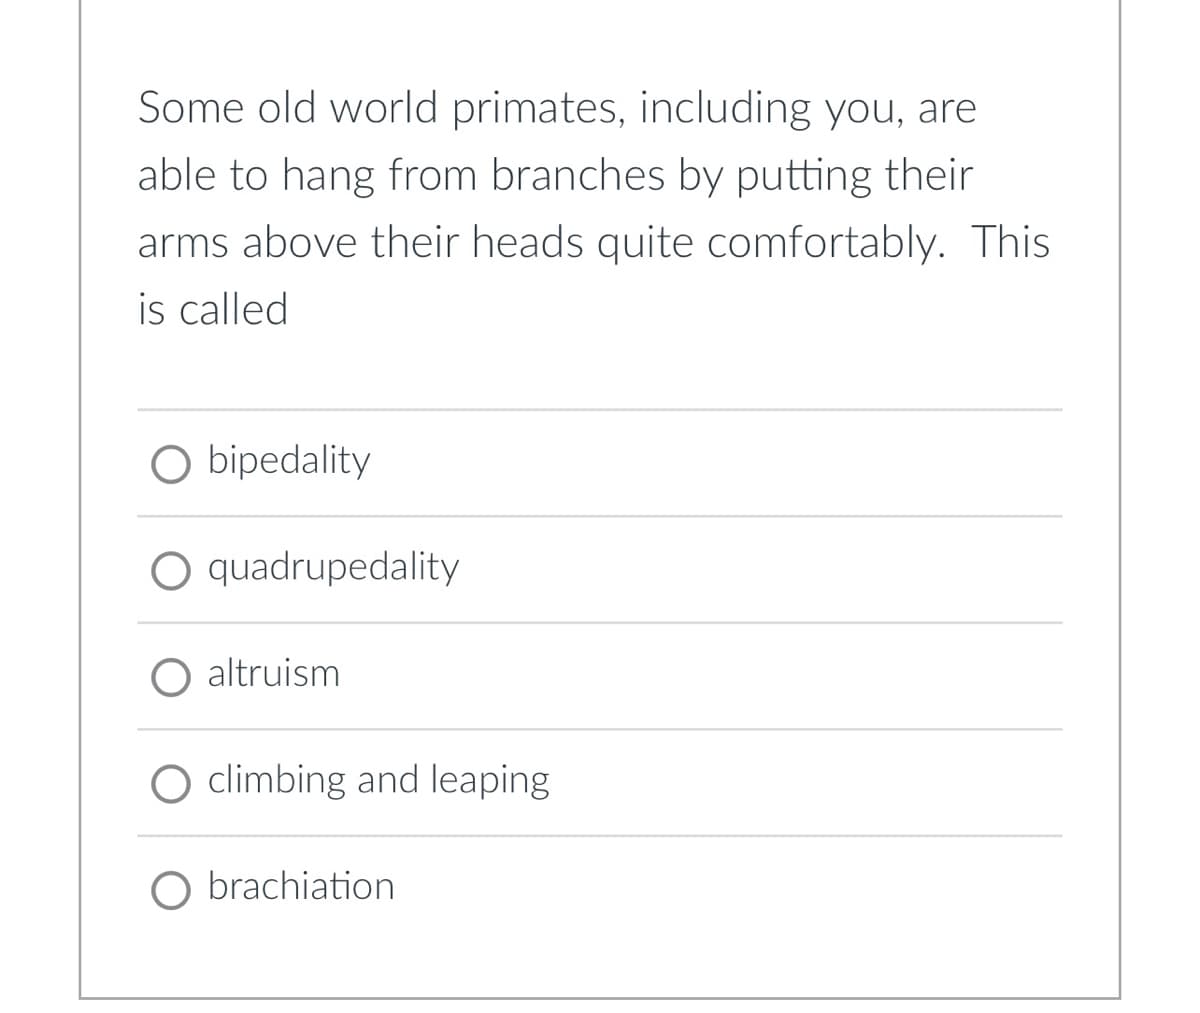 Some old world primates, including you, are
able to hang from branches by putting their
arms above their heads quite comfortably. This
is called
O bipedality
O quadrupedality
altruism
climbing and leaping
O brachiation